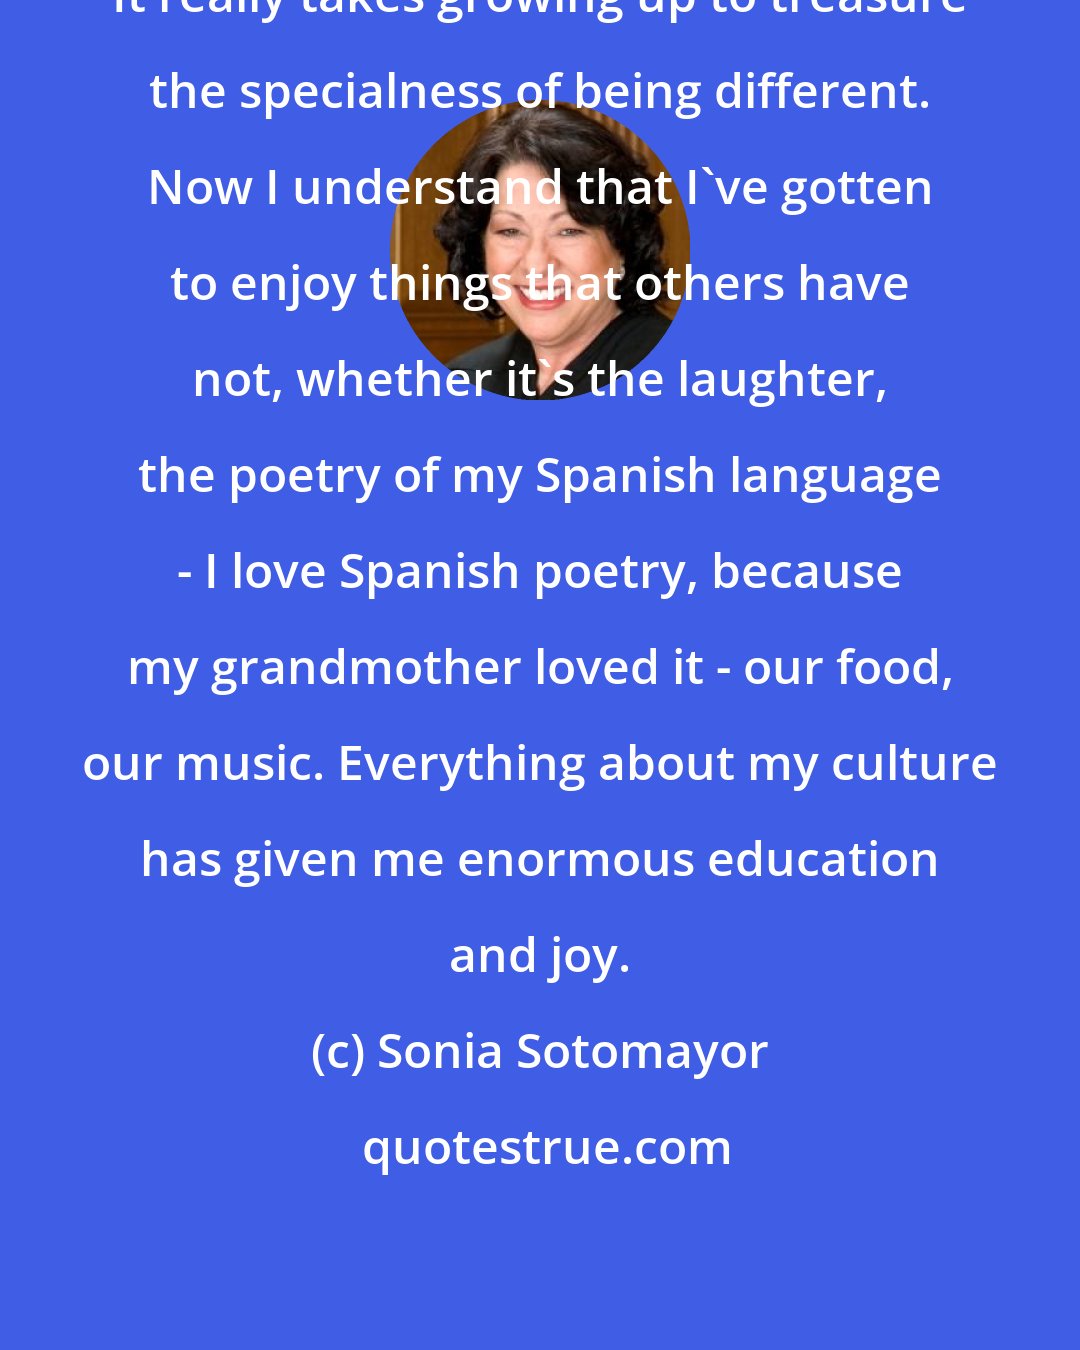 Sonia Sotomayor: It really takes growing up to treasure the specialness of being different. Now I understand that I've gotten to enjoy things that others have not, whether it's the laughter, the poetry of my Spanish language - I love Spanish poetry, because my grandmother loved it - our food, our music. Everything about my culture has given me enormous education and joy.